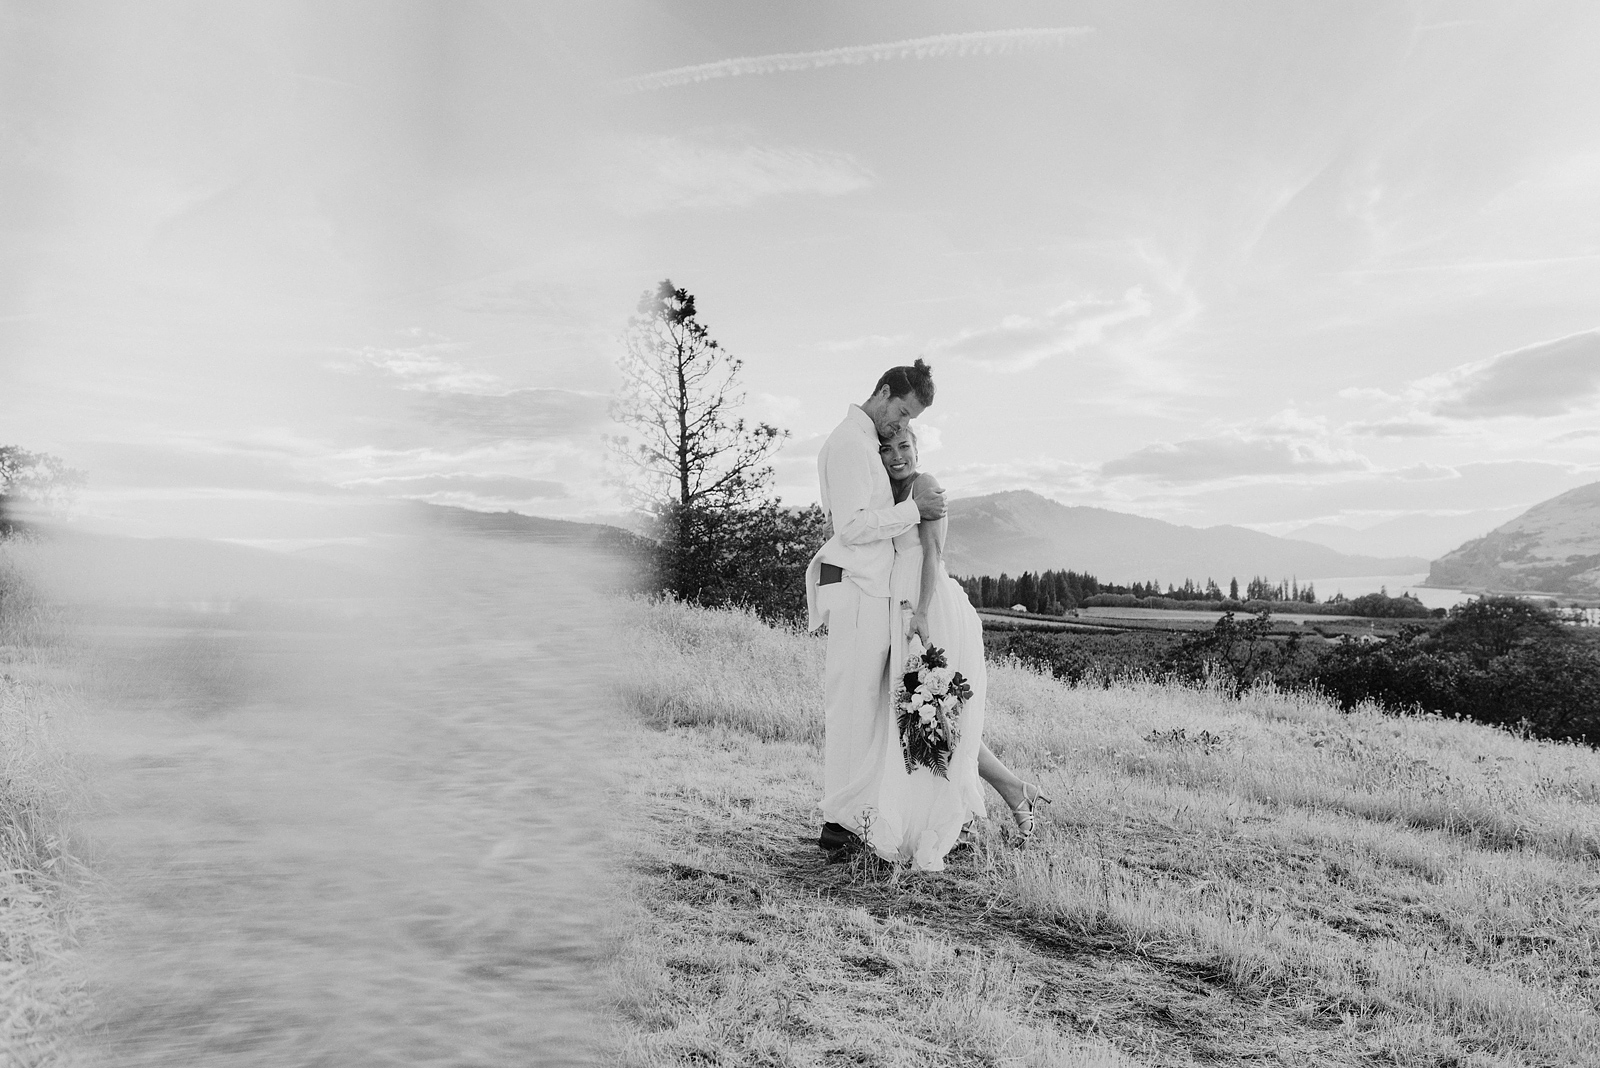 Black and white prism portrait of bride and groom standing in an open field - Columbia River Gorge wedding in Mosier, OR